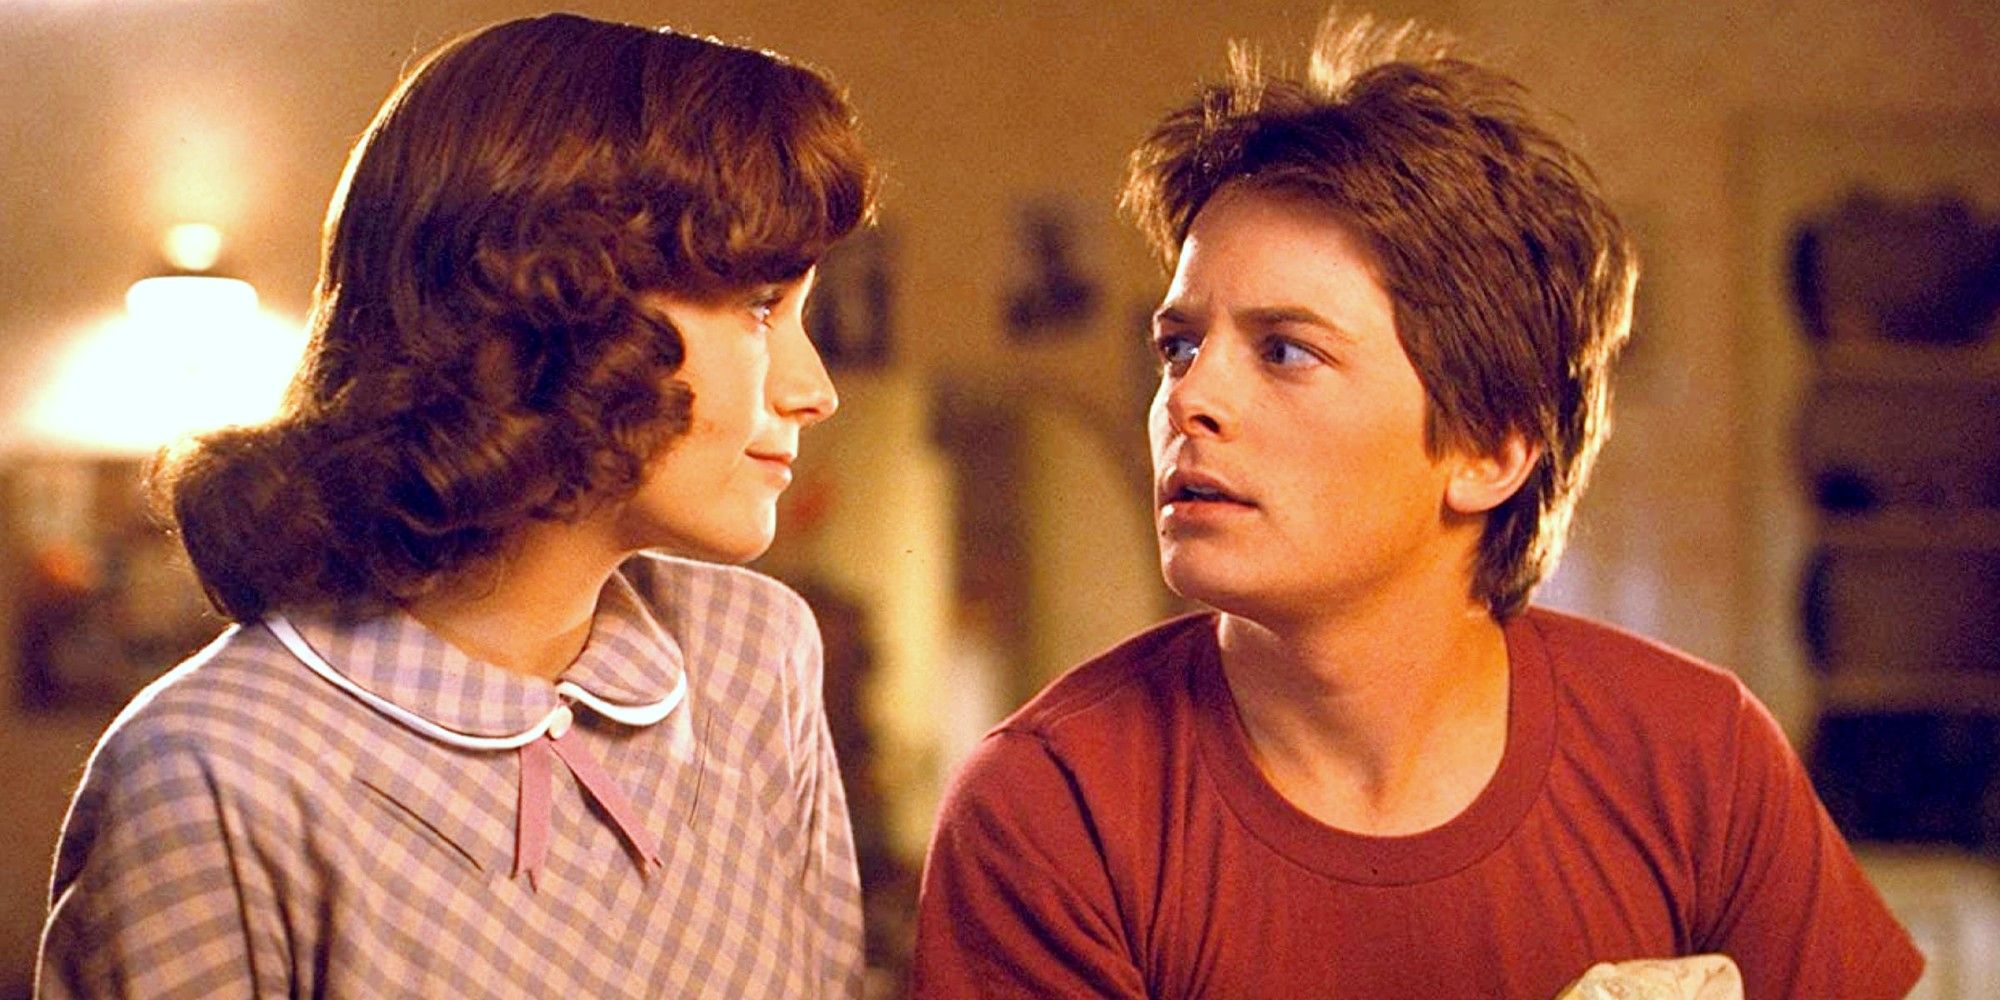 Lea Thompson and Michael J Fox in Back to the Future sitting on a bed and looking at each other